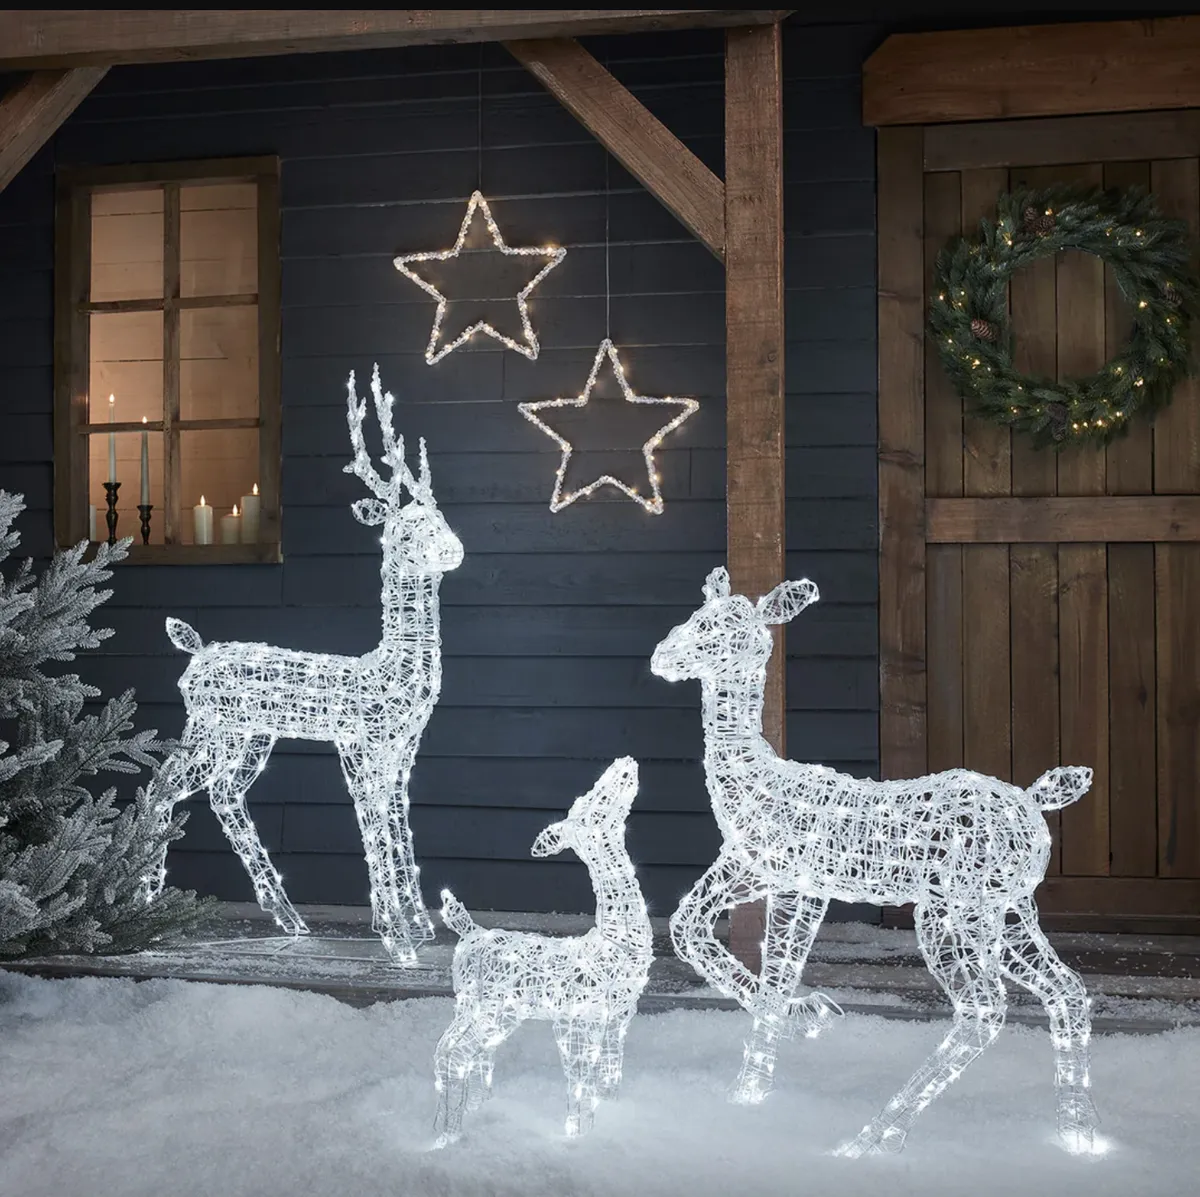 Swinsty Acrylic Light Up Reindeer Family - was £249.99 now £194.99 (save £55)